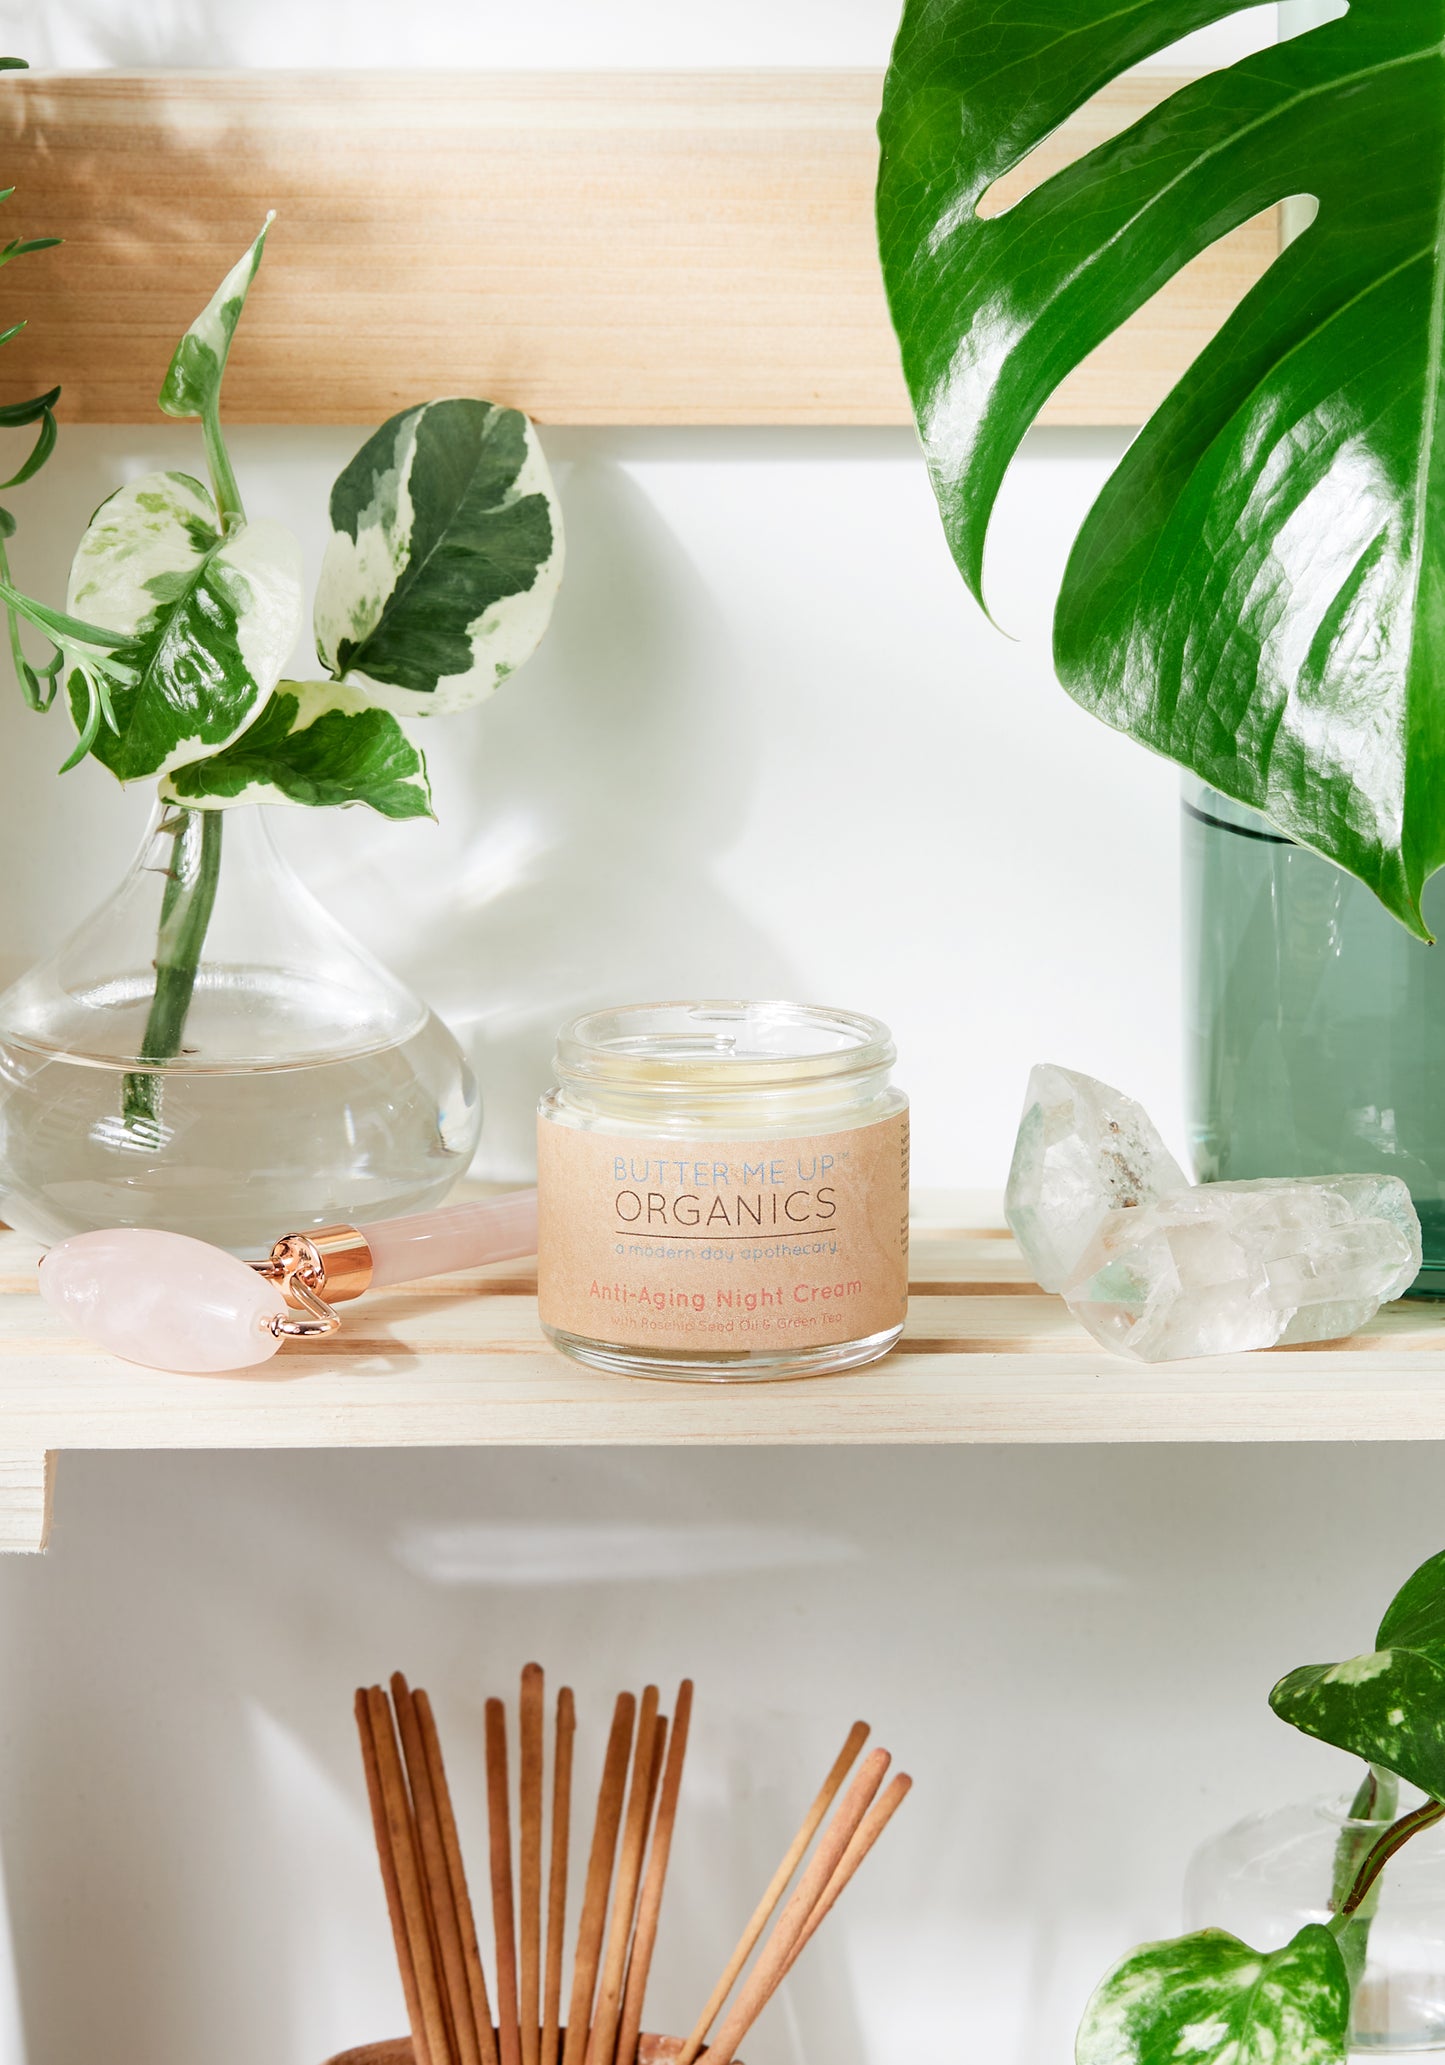 A jar of "White Smokey Anti Aging Night Cream Face Moisturizer Organic" on a shelf surrounded by green plants, crystals, and incense sticks, conveying a serene spa-like atmosphere. This anti-wrinkle cream is formulated with all-natural ingredients.